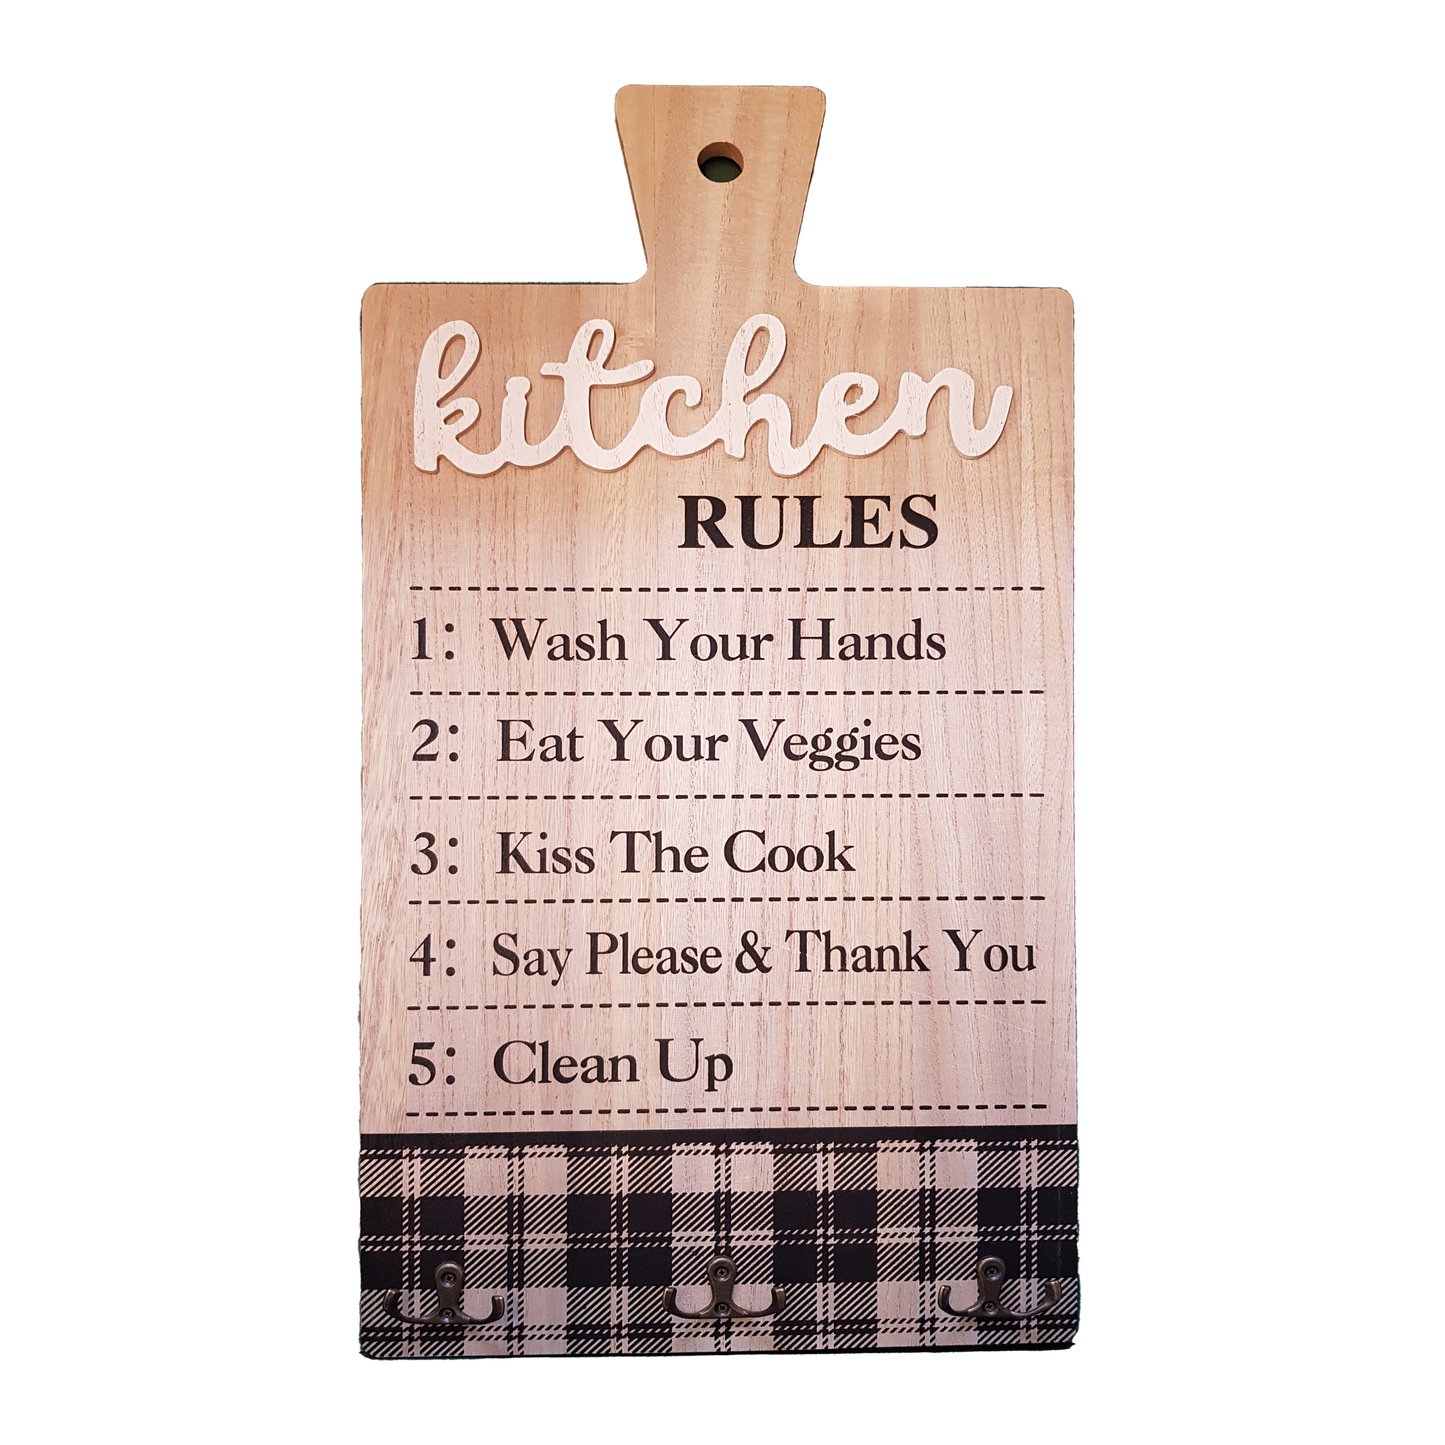 Kitchen Rules Sign